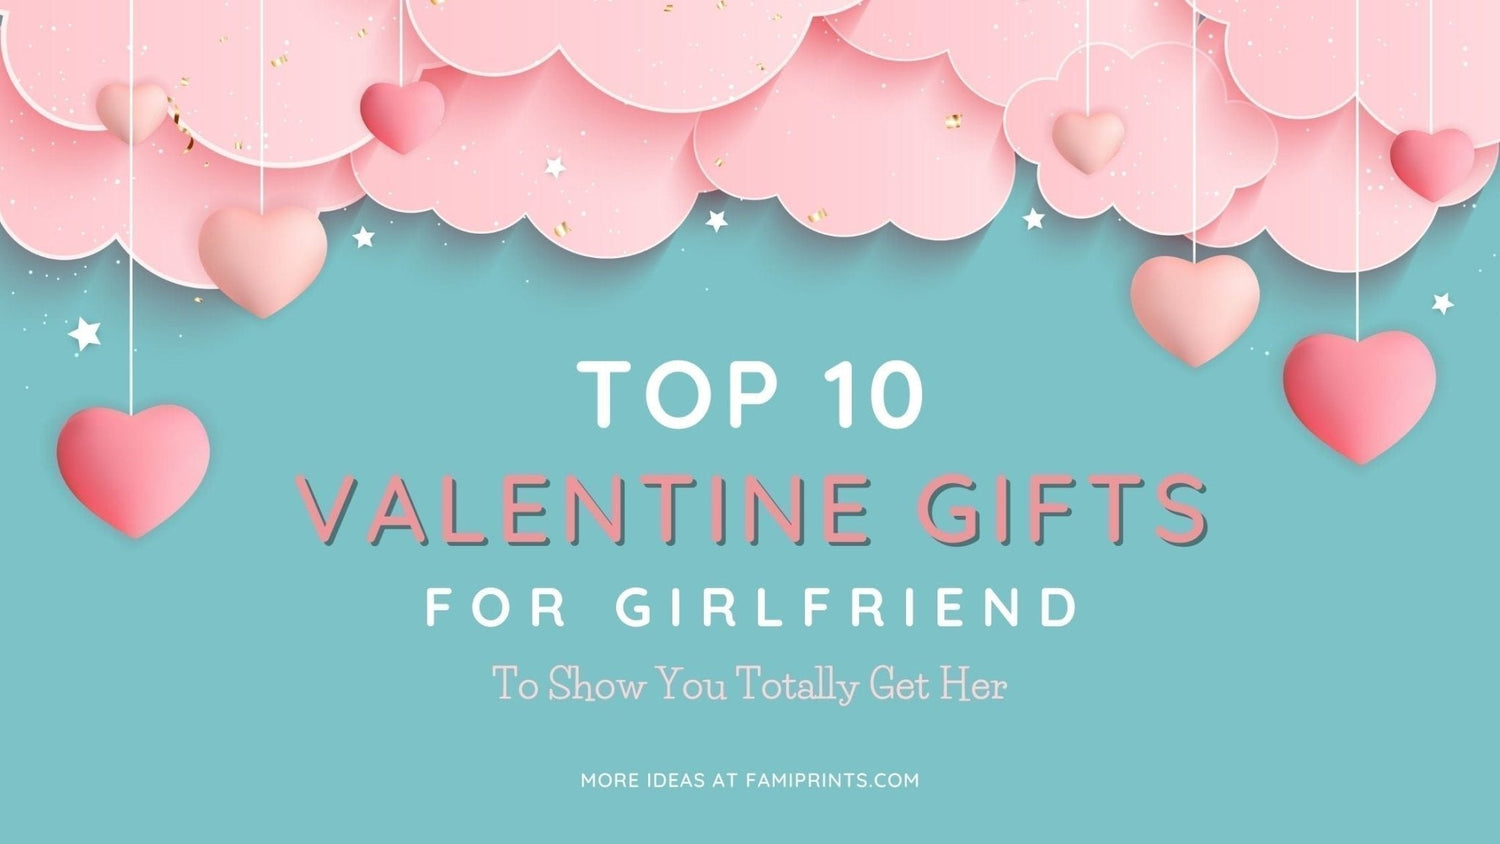 Top 10 Valentine Gifts For Girlfriend To Show You Totally Get Her | FamiPrints | Trending Customizable Family Gifts